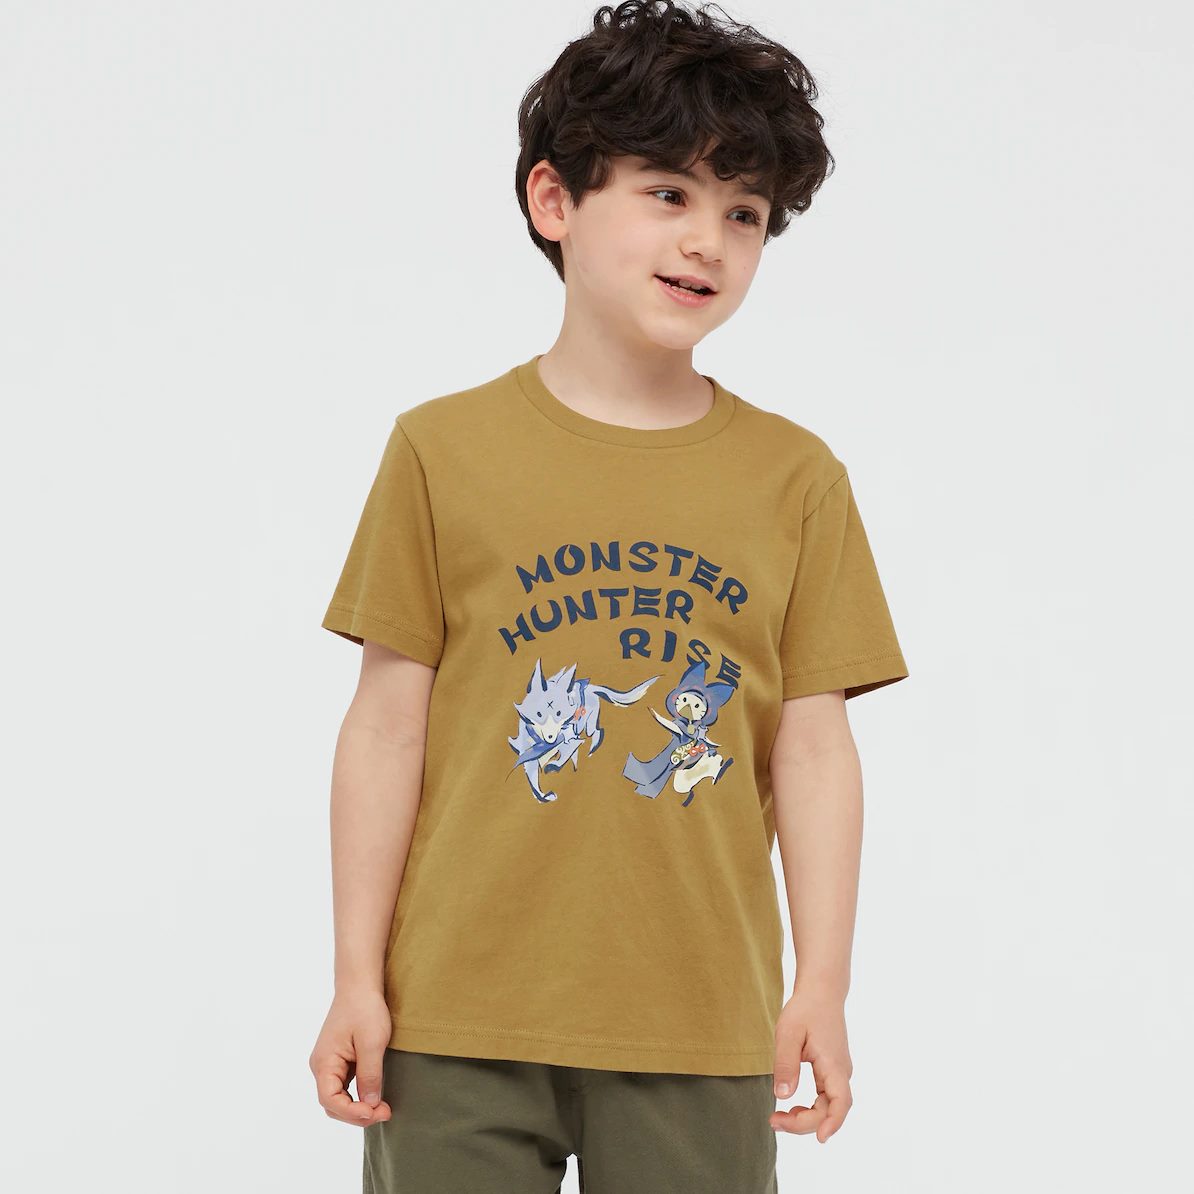 Monster Hunter Rise UNIQLO Shirt Designs Feature Palico and Palamute